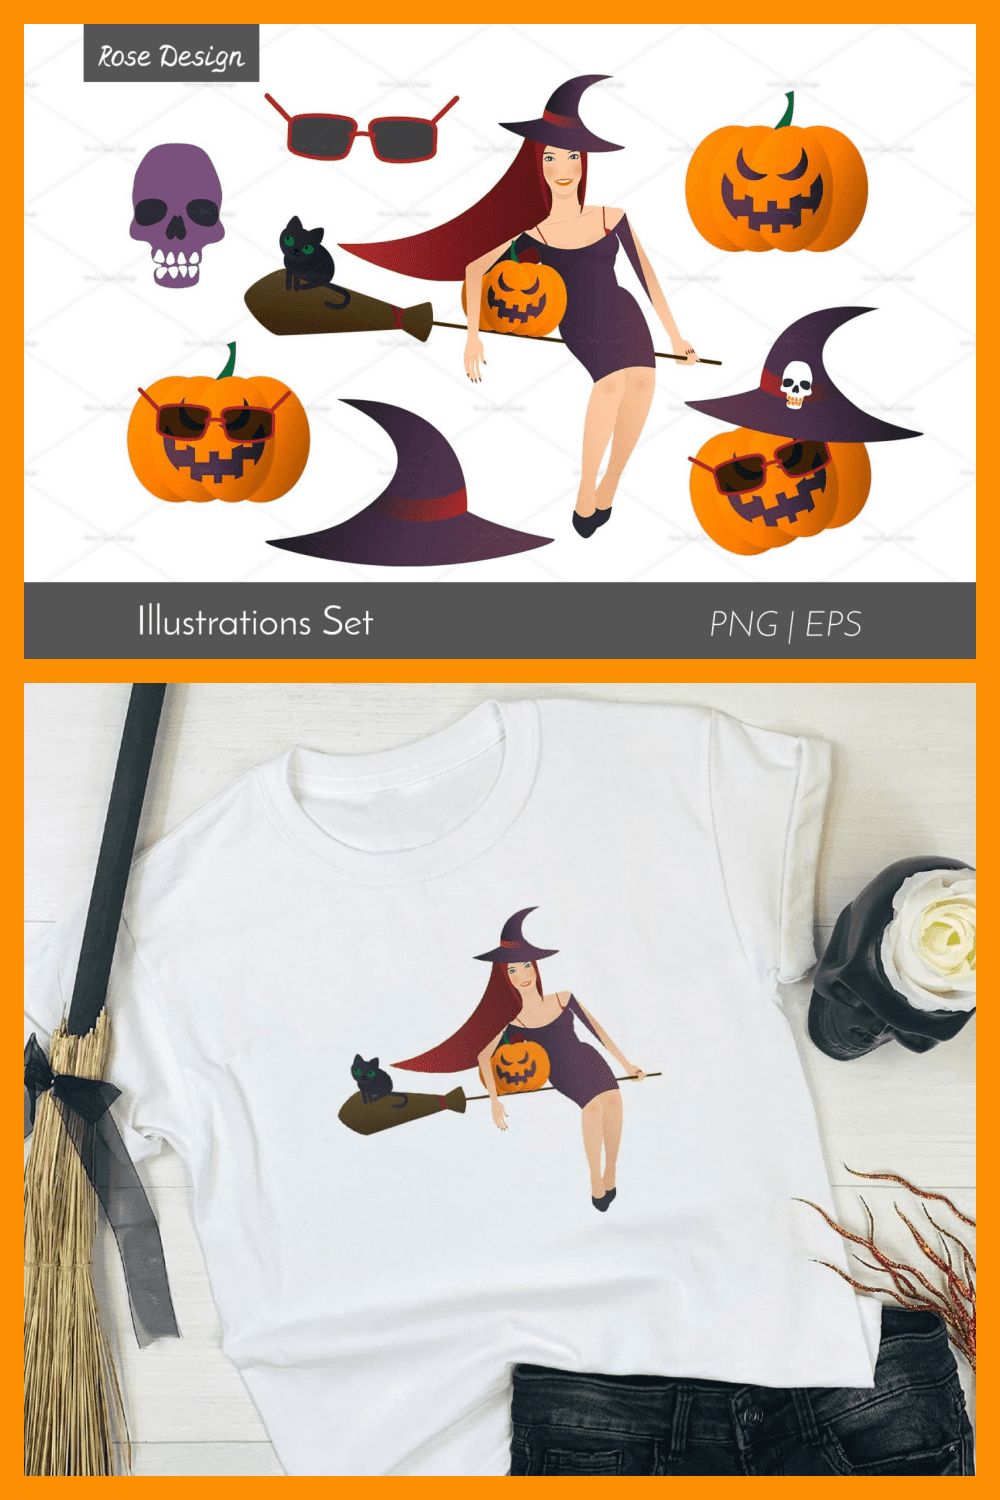 Specific illustrations that symbolize the holiday of Halloween and have long been its symbols.